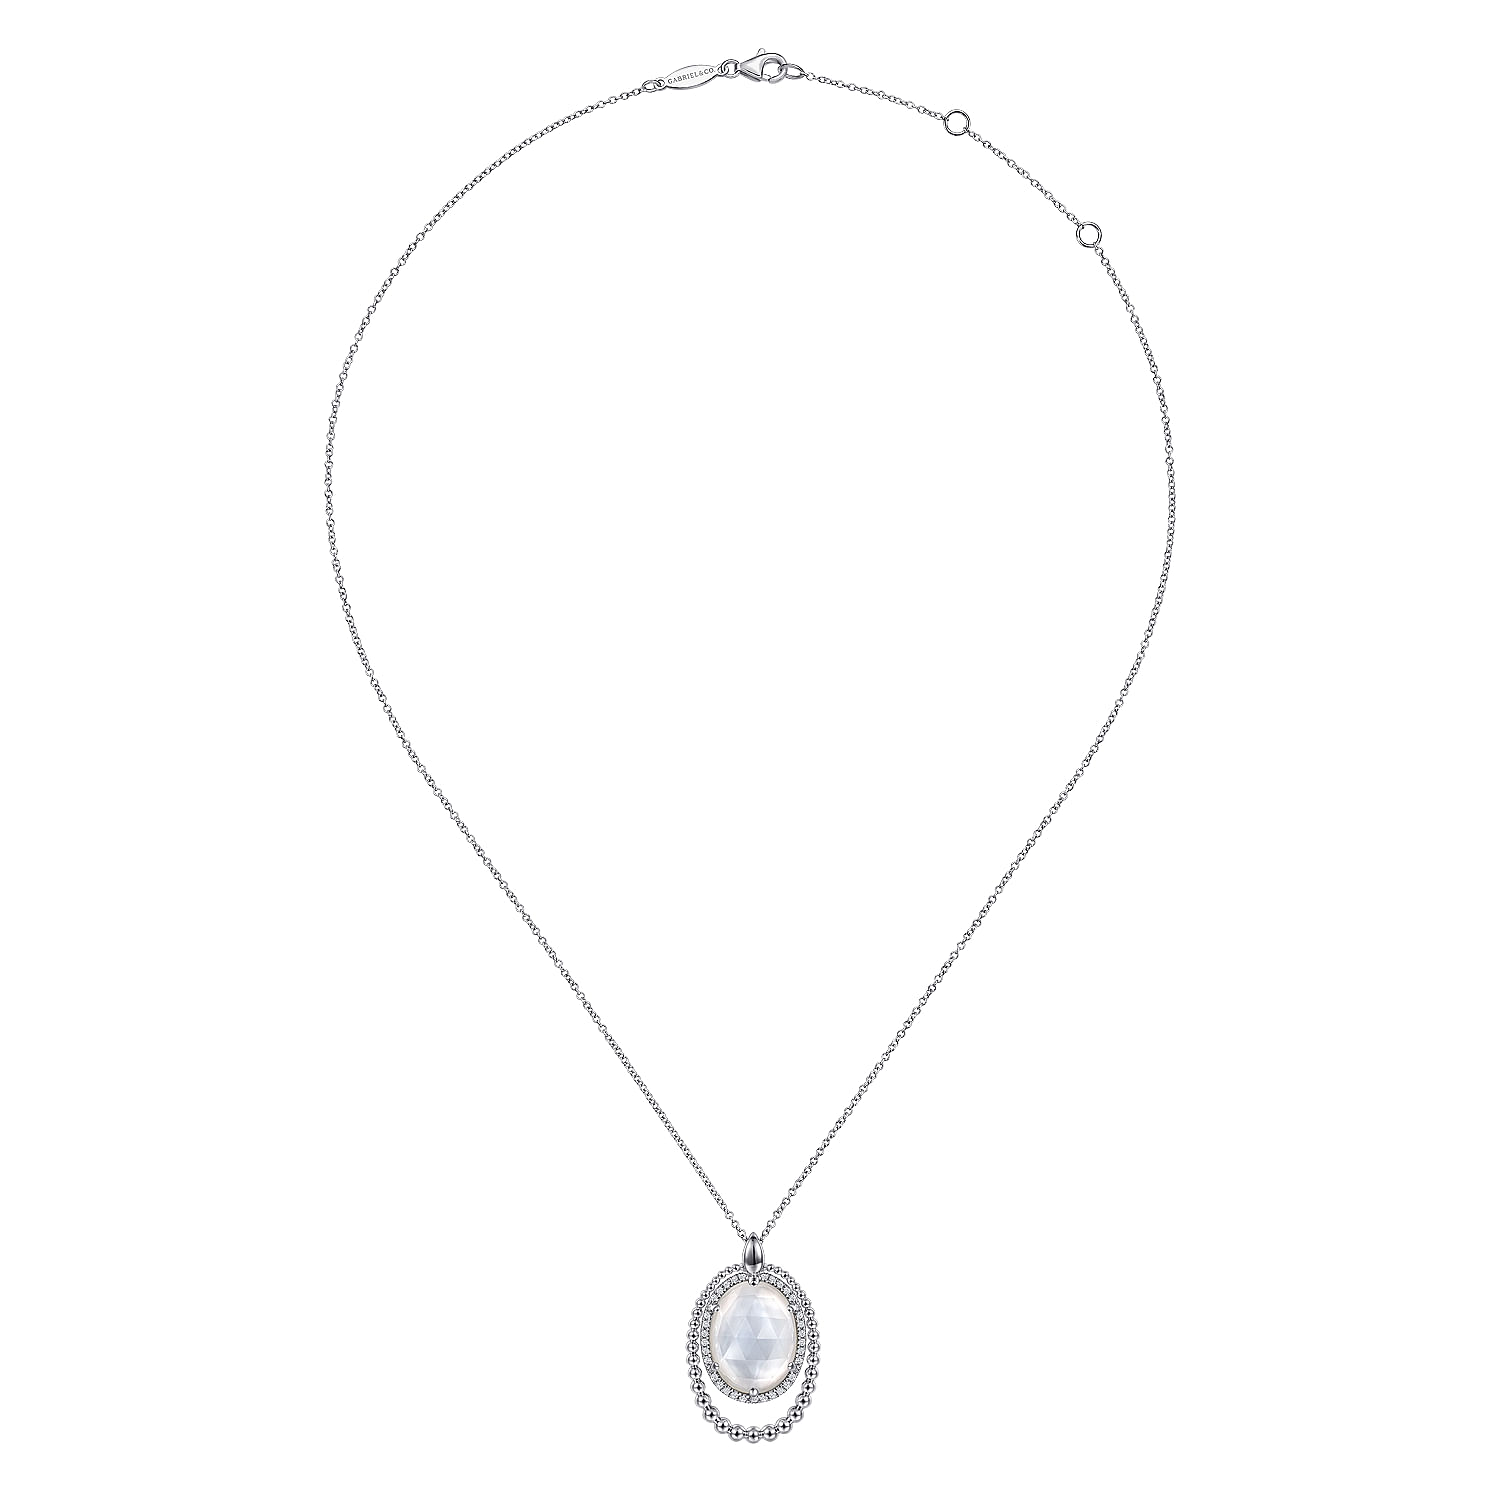 925 Sterling Silver White Sapphire and Rock Crystal and White MOP Pendant Necklace